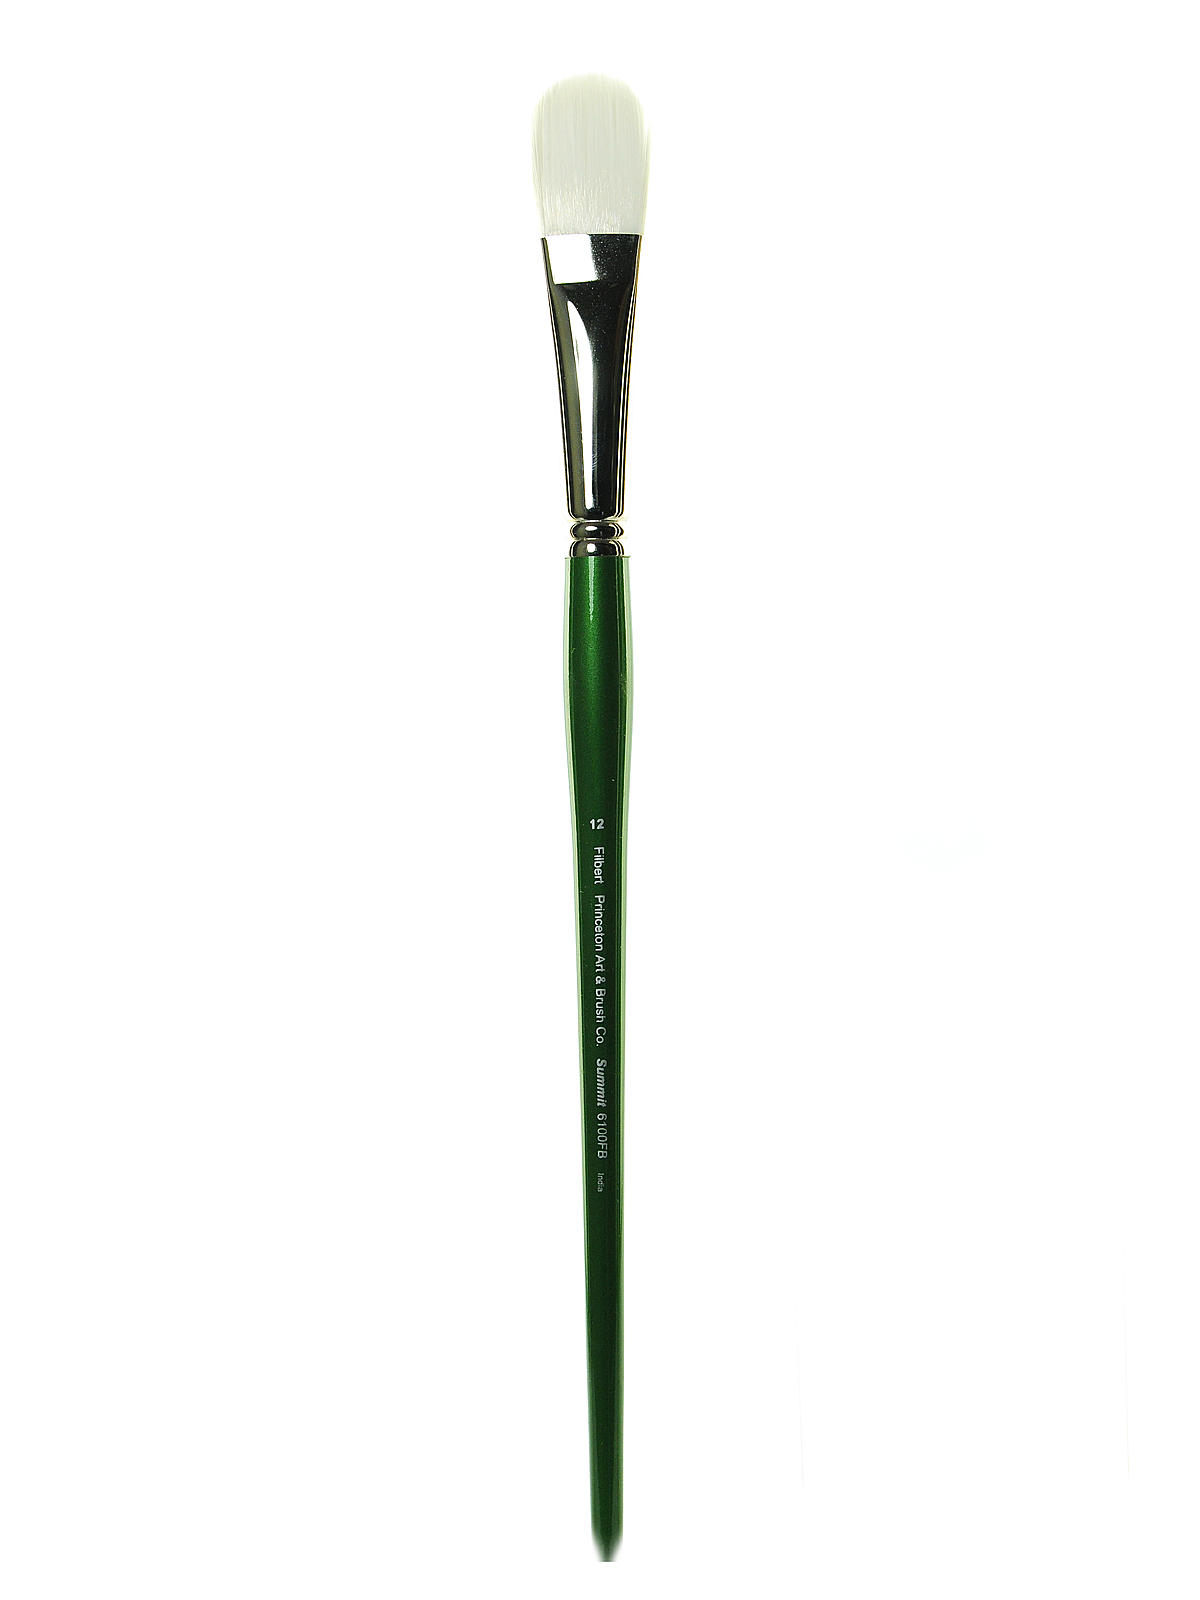 6100 Summit White Synthetic Long Handle Brushes 12 Filbert